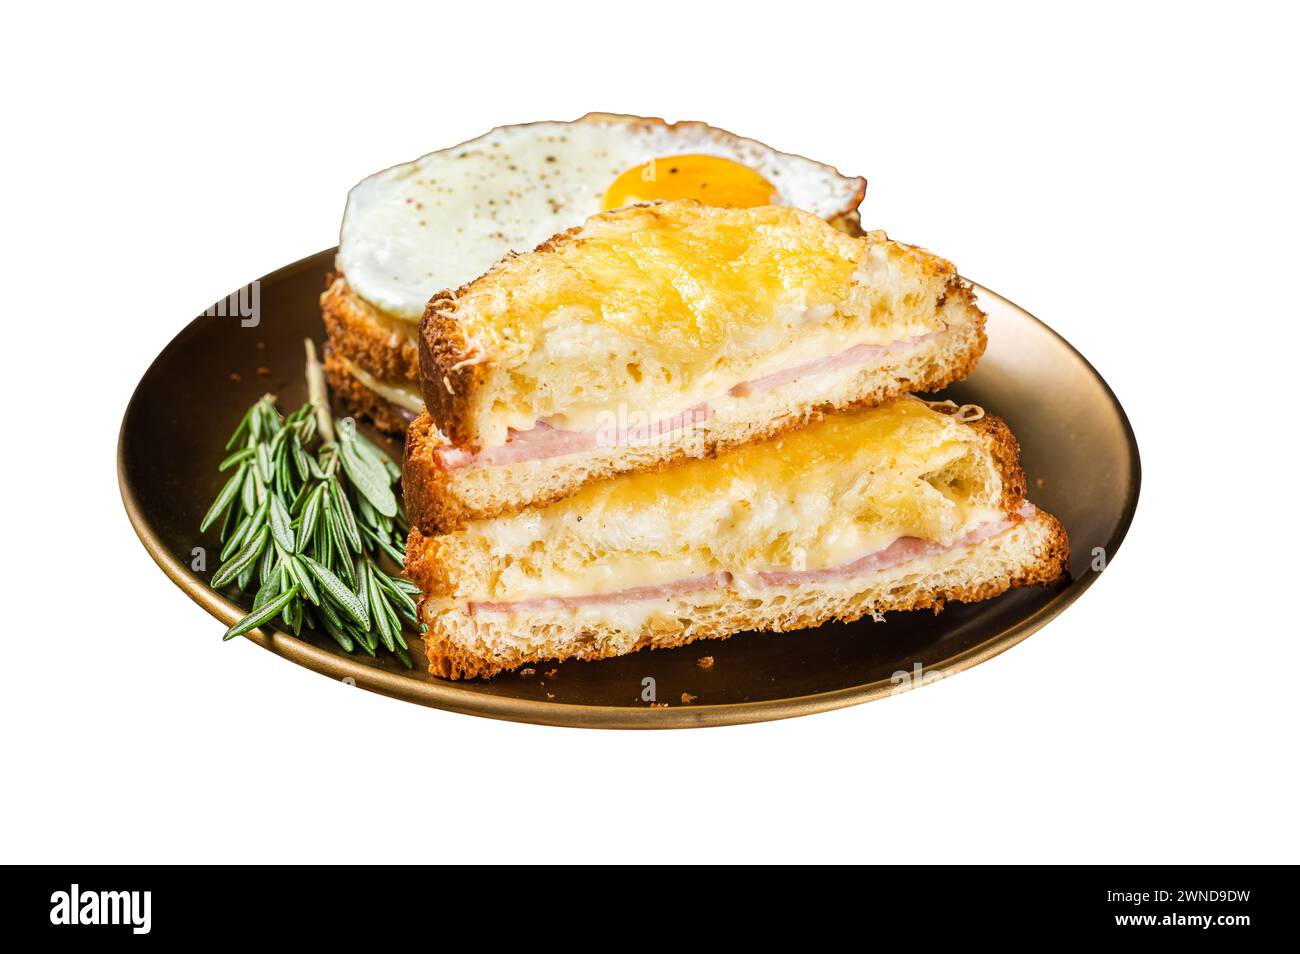 Croque monsieur and croque madame sandwiches with sliced ham, melted emmental cheese and egg, French toasts. Isolated on white background. Top view Stock Photo